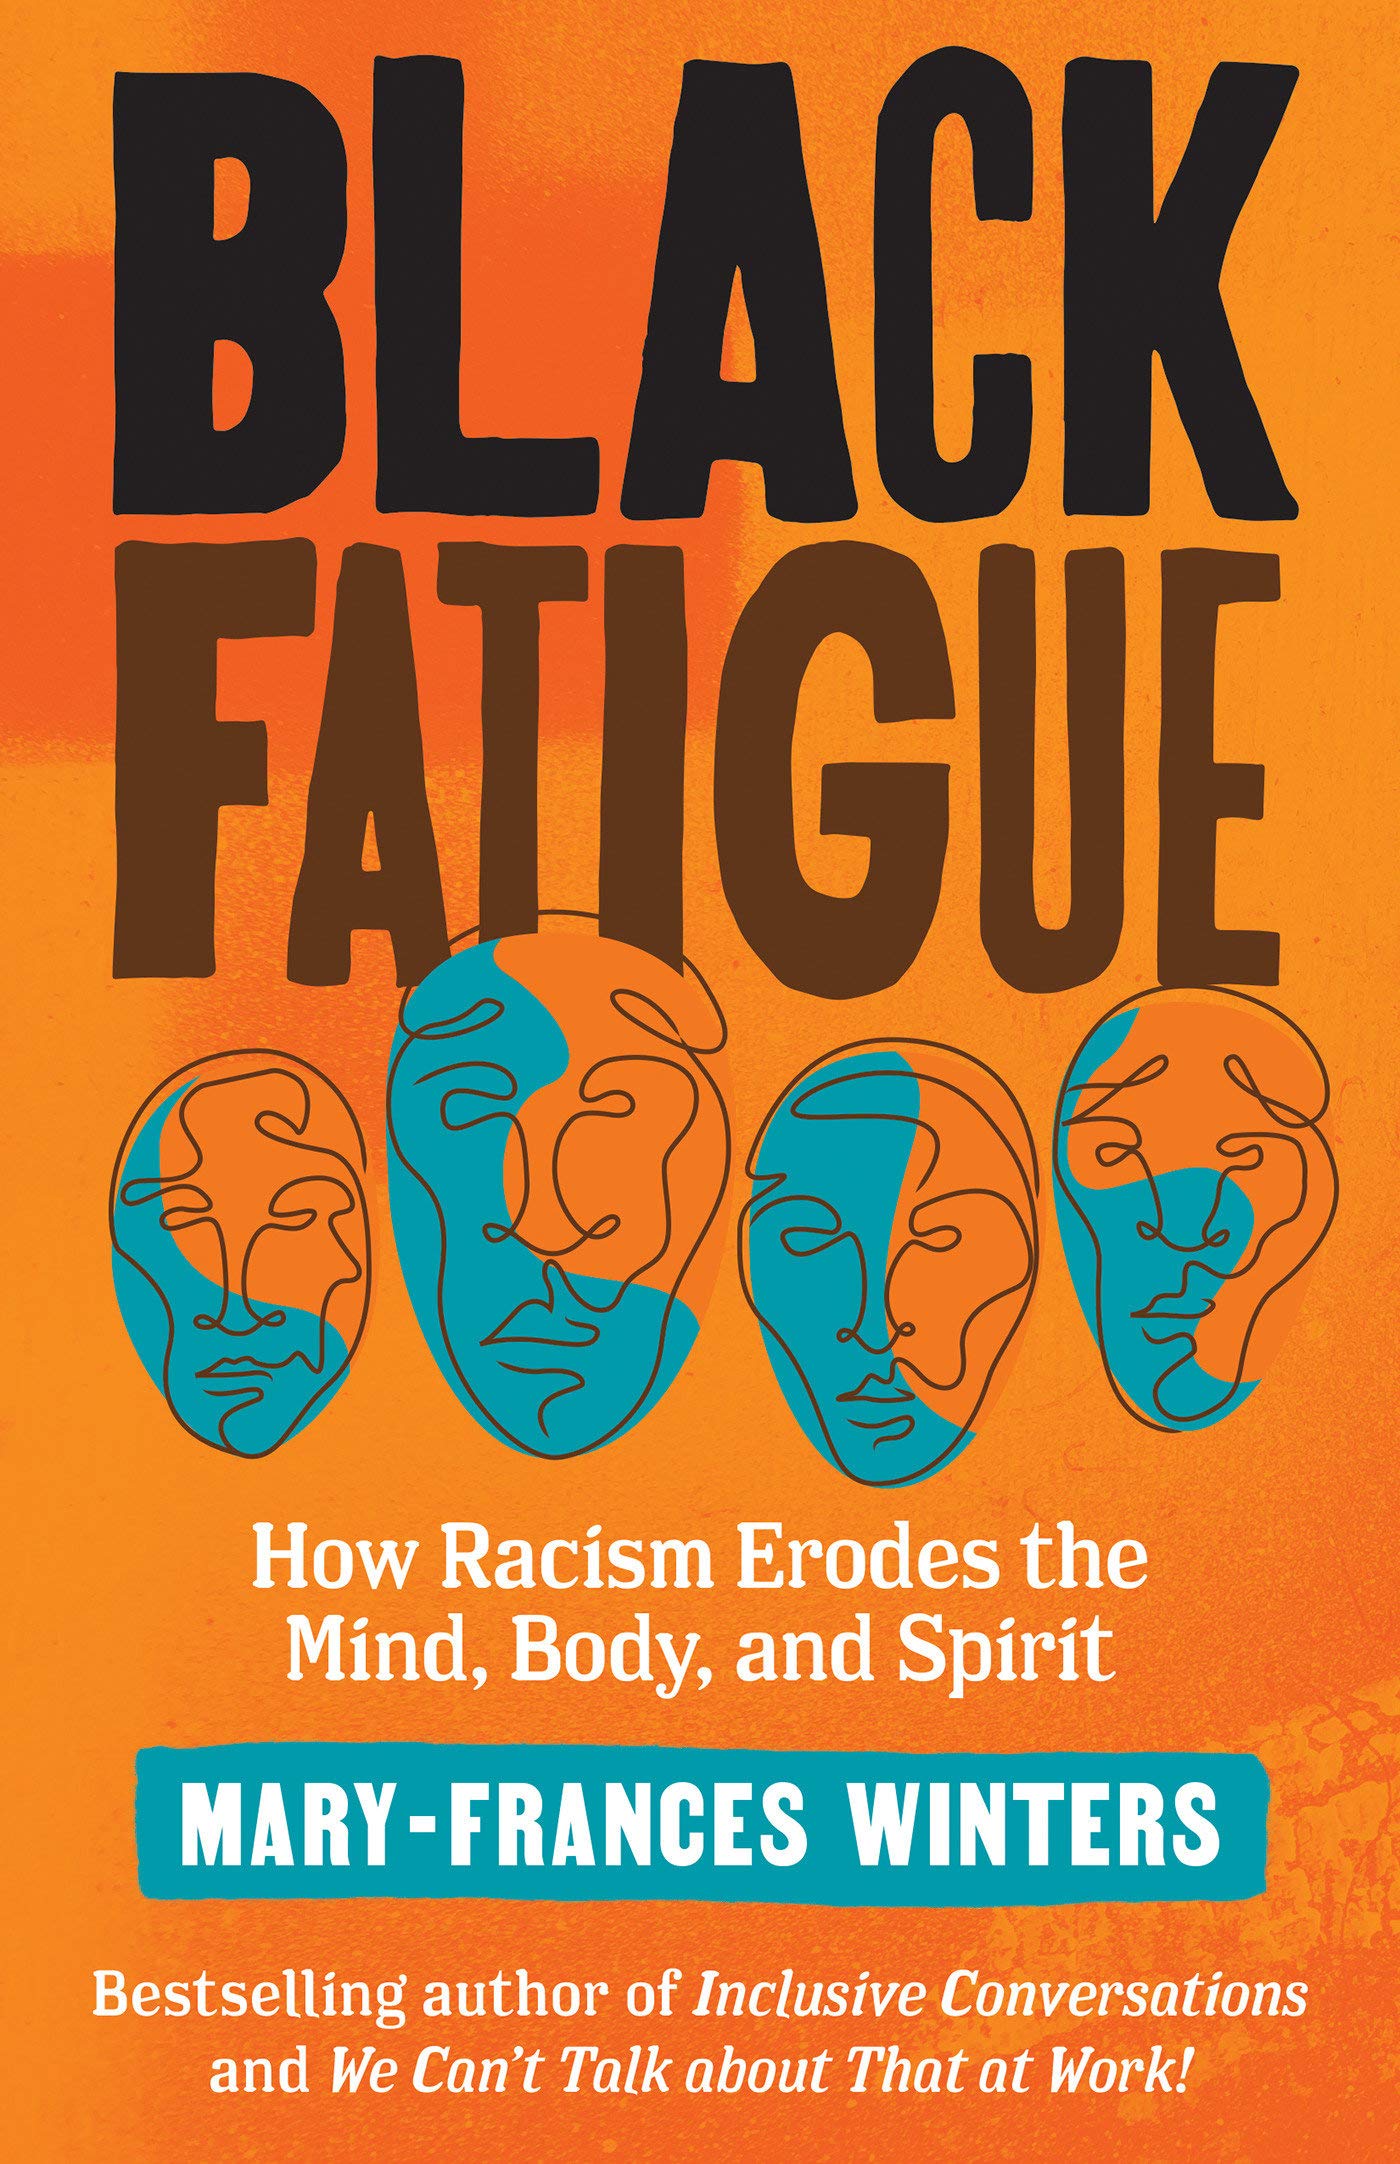 Black Fatigue // How Racism Erodes the Mind, Body, and Spirit